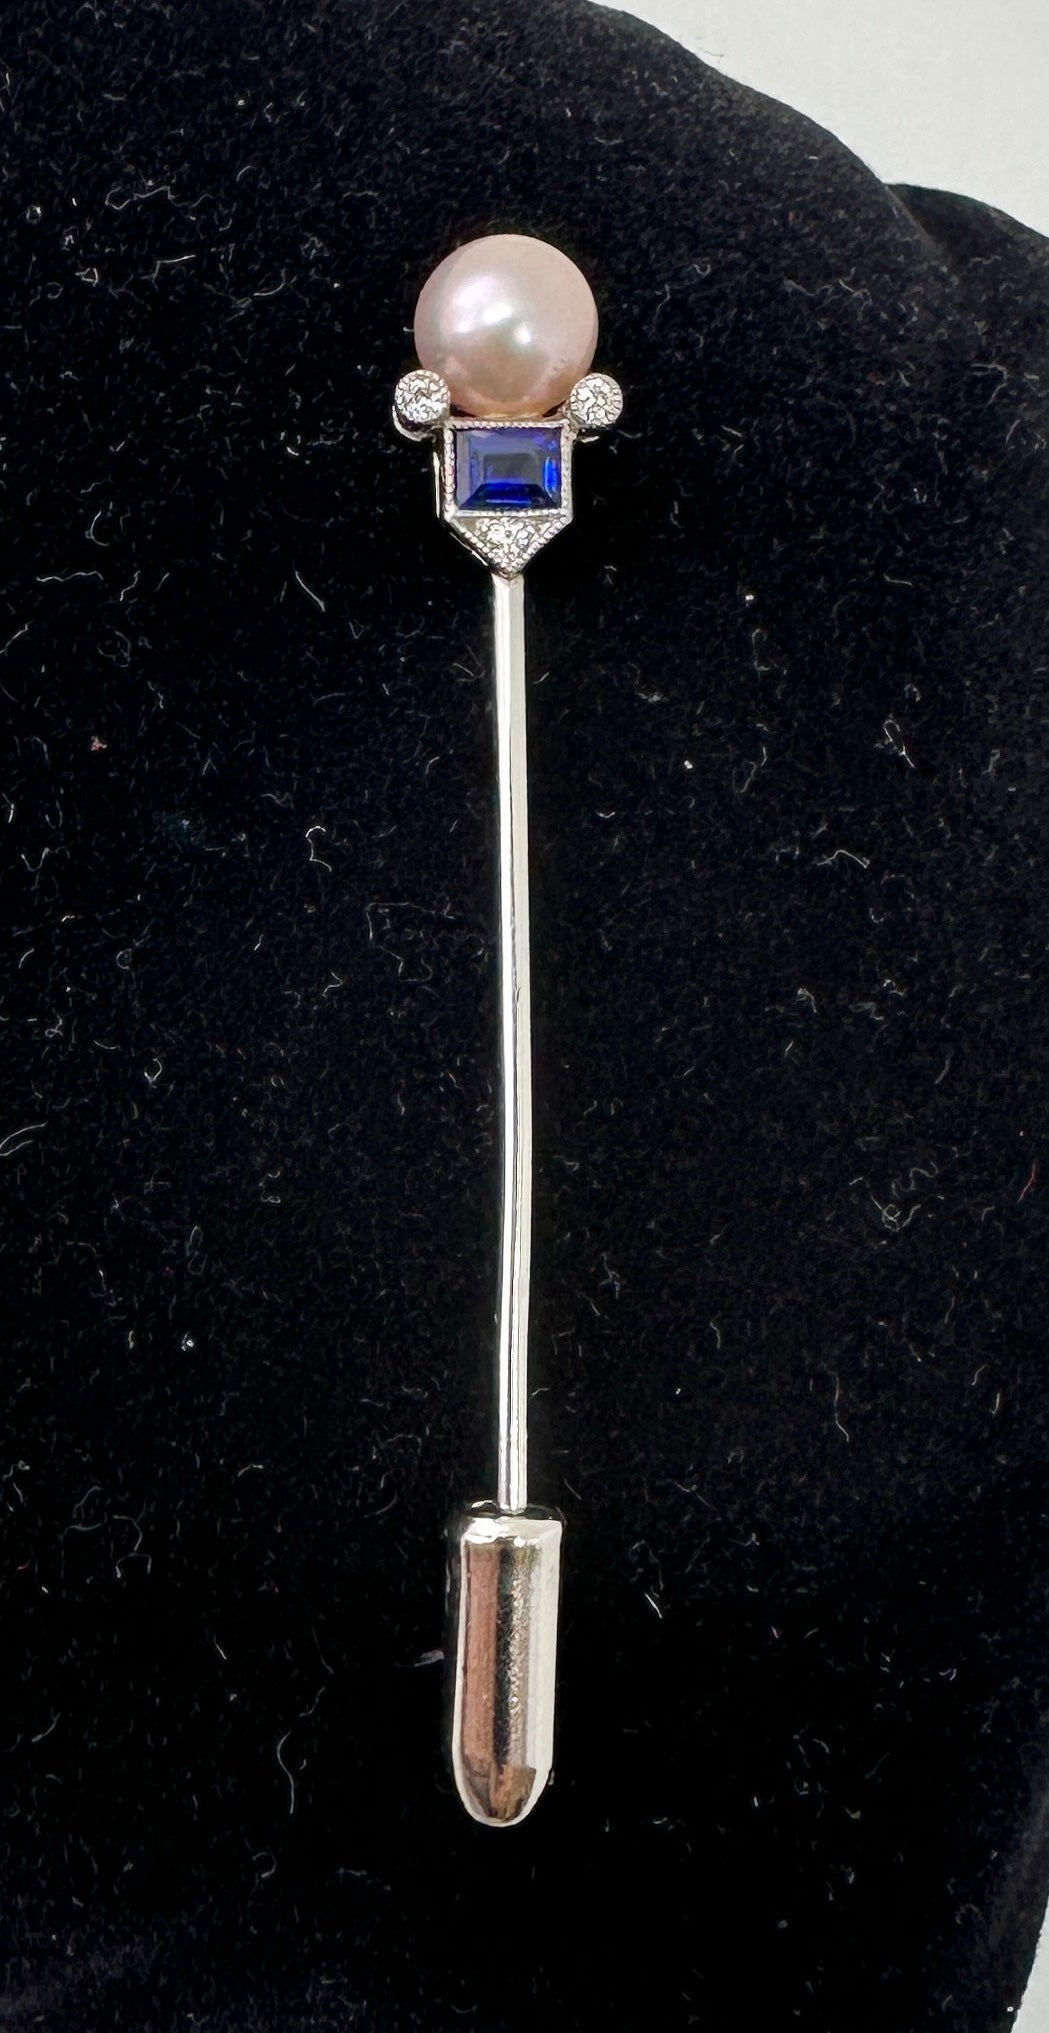 This is an extraordinary Art Deco Sapphire, 7mm Pearl, Old European Cut Diamond, Platinum, Tiffany & Co. Stick Pin Brooch.  It is very rare to find original Art Deco Tiffany & Co. jewels and this one is absolutely magnificent.  The design highlights